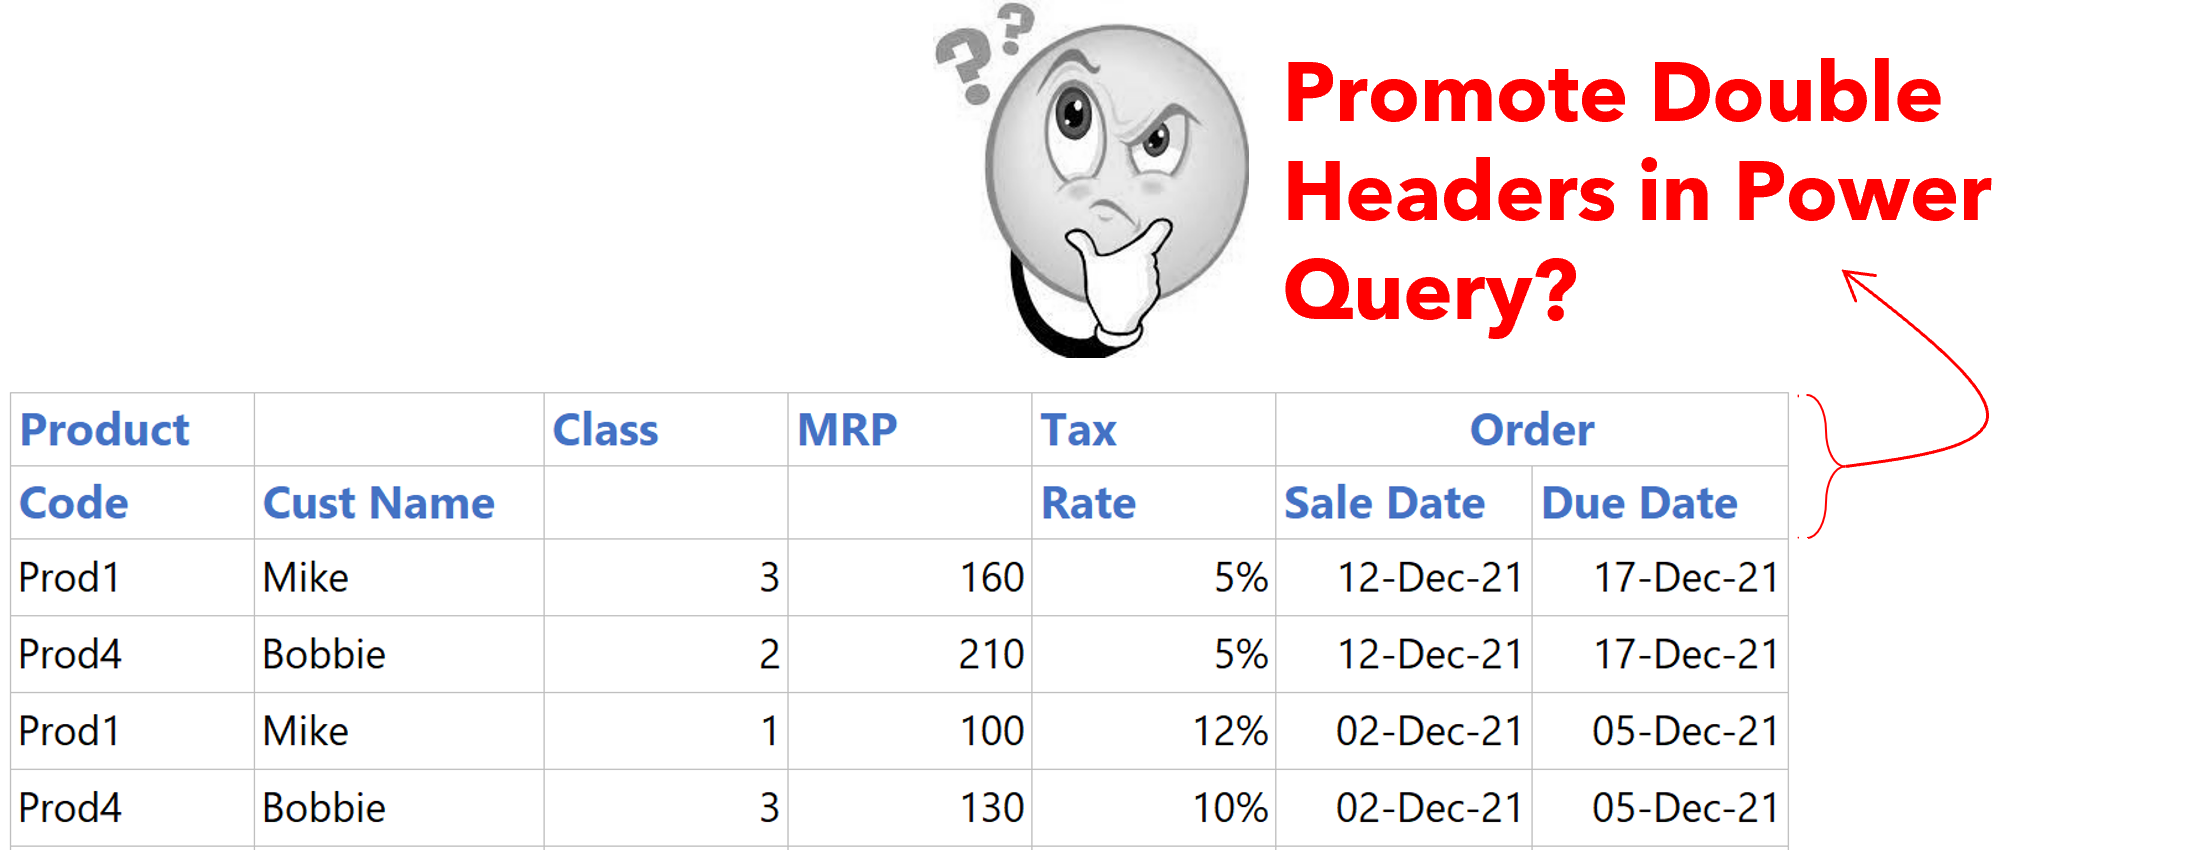 Promote Double Headers in Power Query Goodly